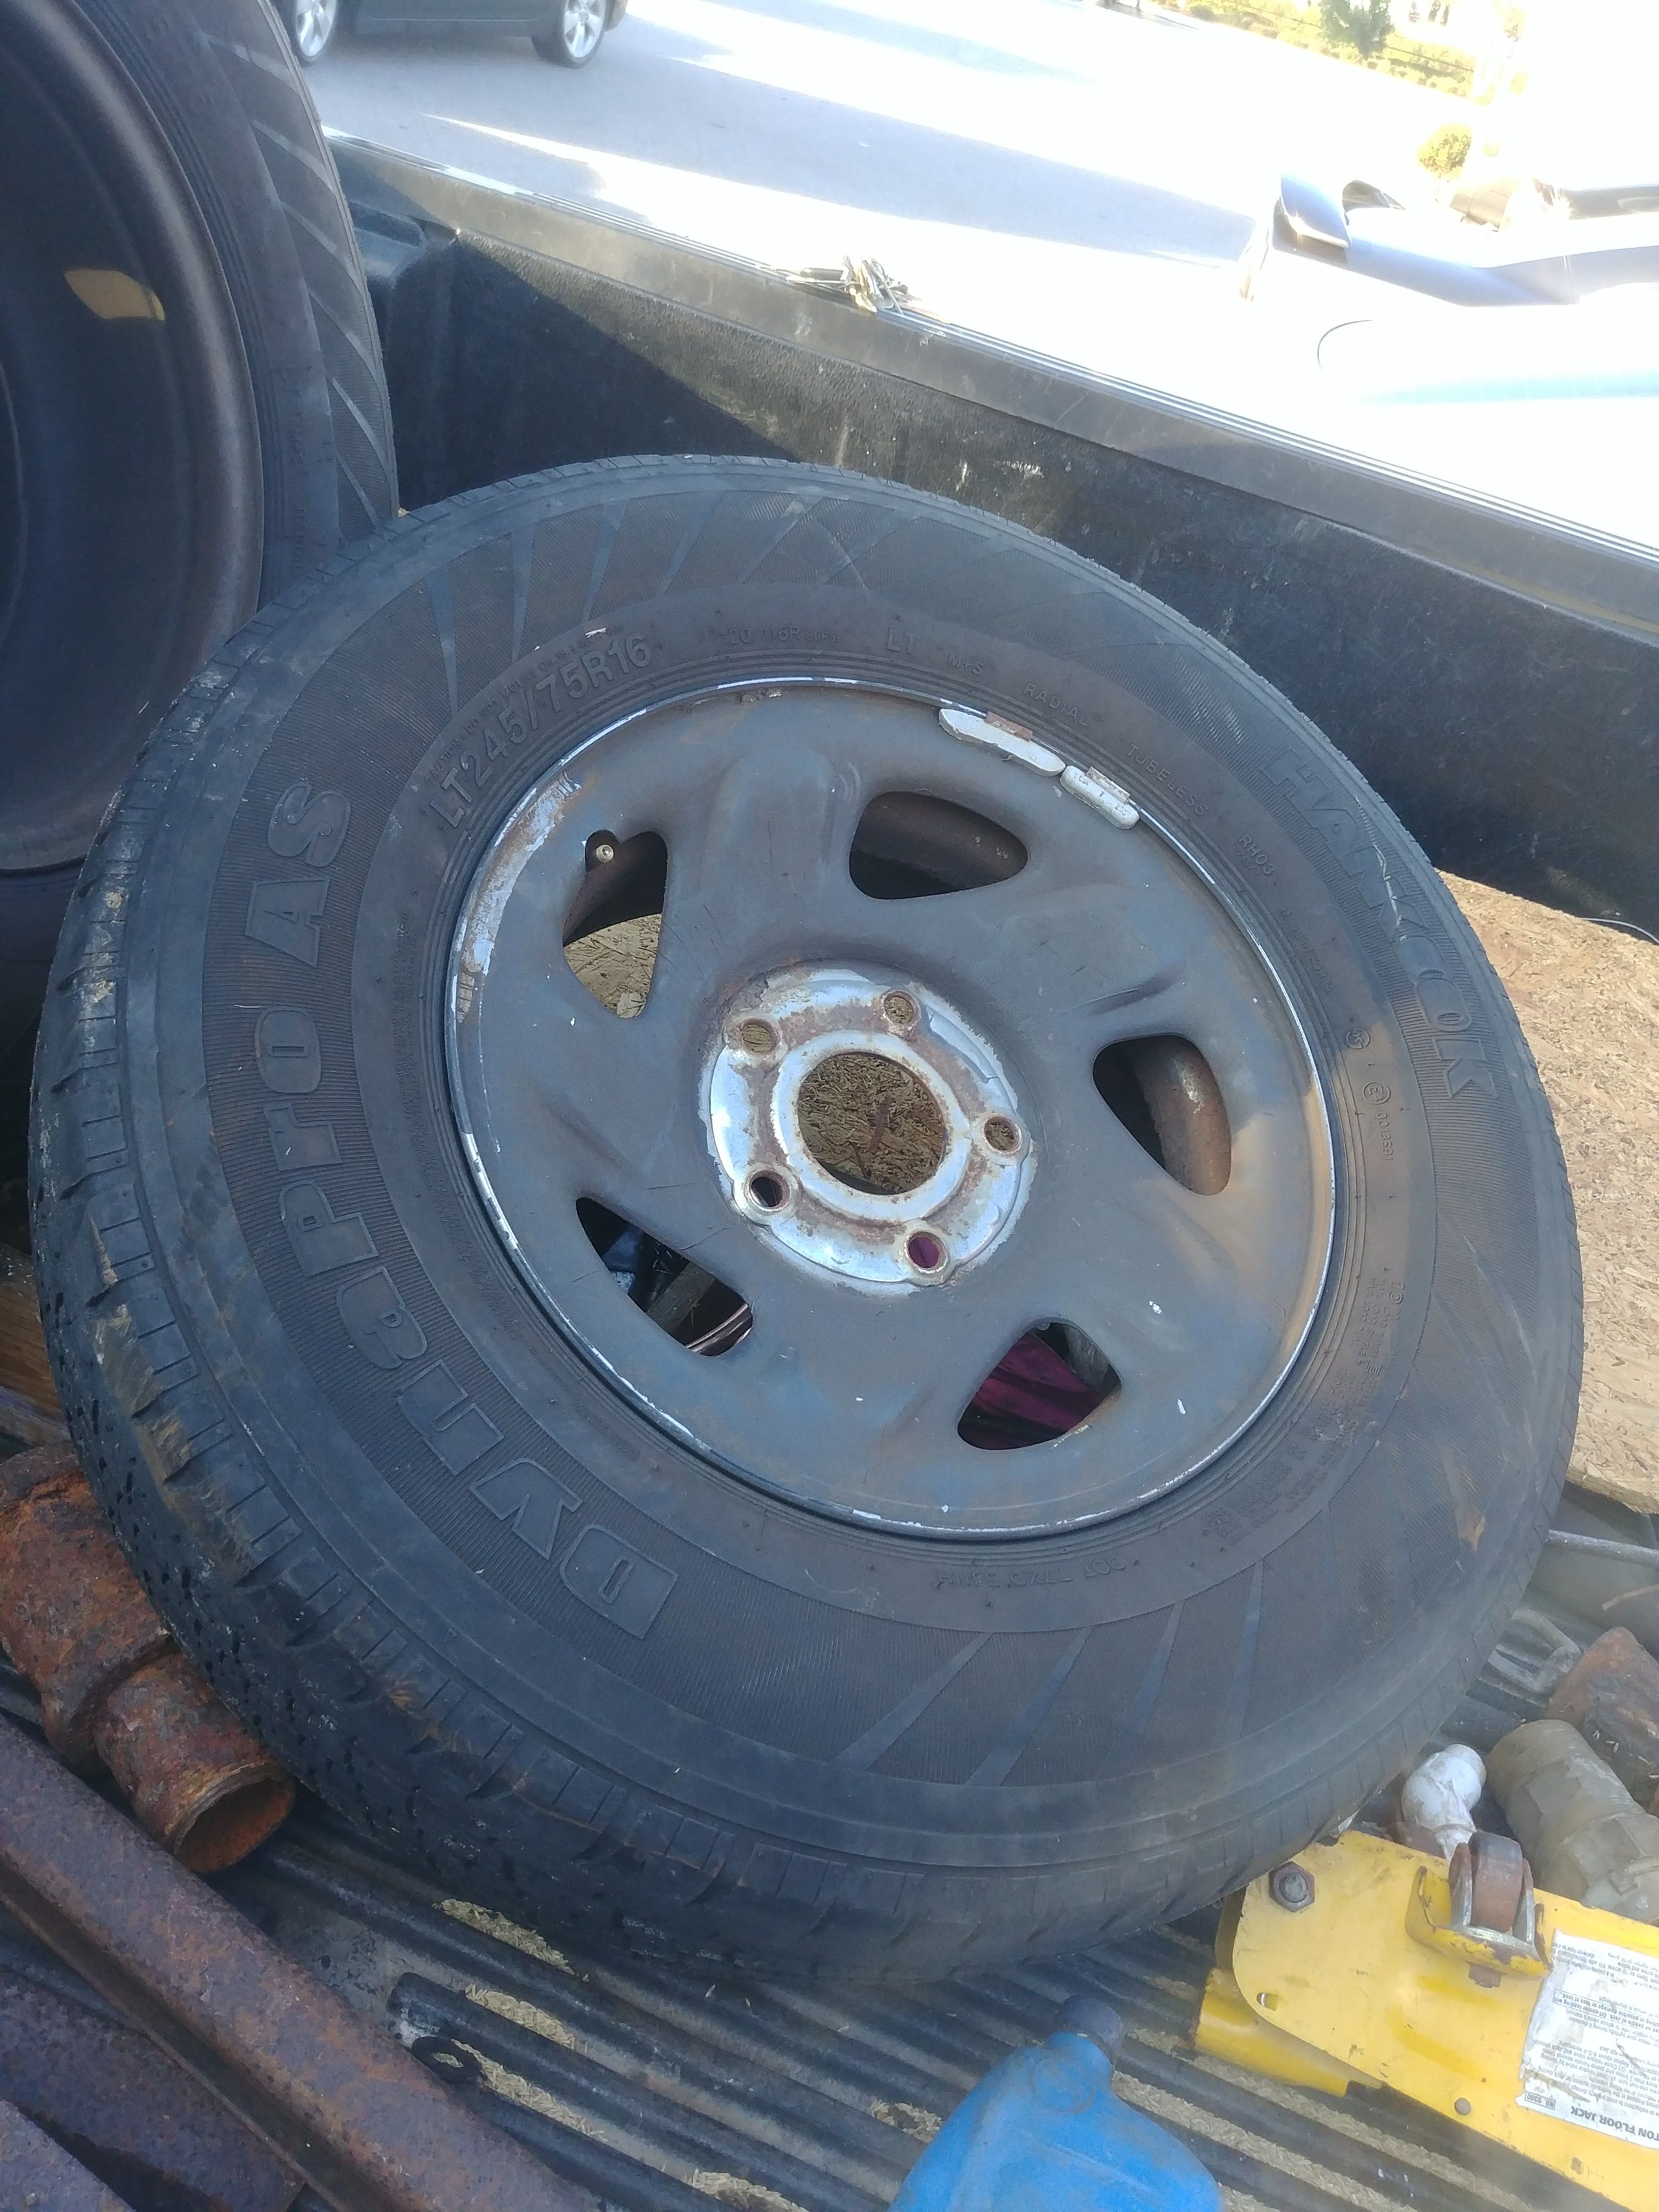 Ford F-150 rim and tire just one not a set in good shape ready to install 5 lug